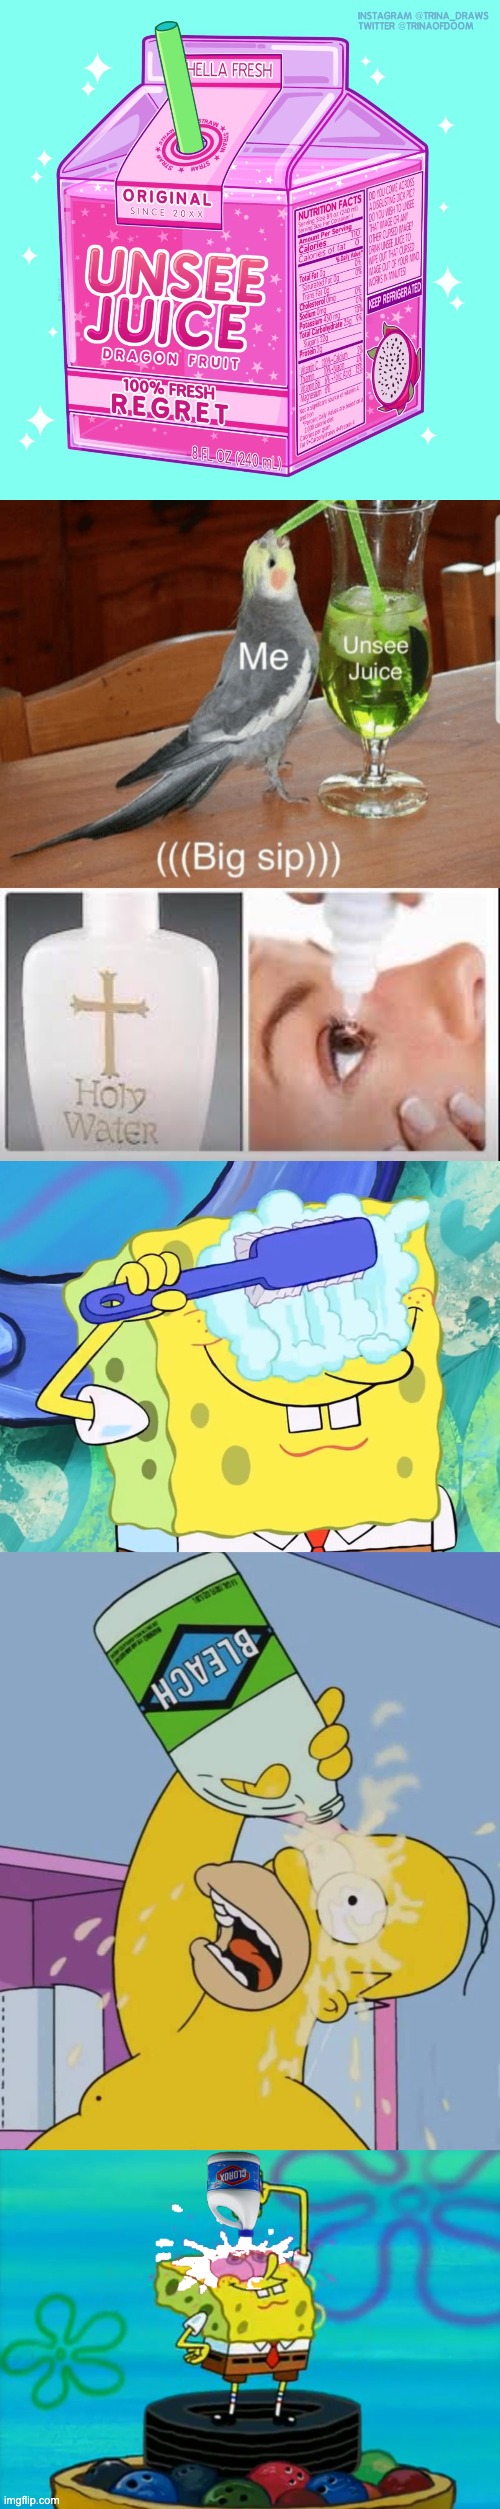 image tagged in unsee juice,holy water,spongebob cleaning eyes,homer with bleach,spongebob pouring bleach | made w/ Imgflip meme maker